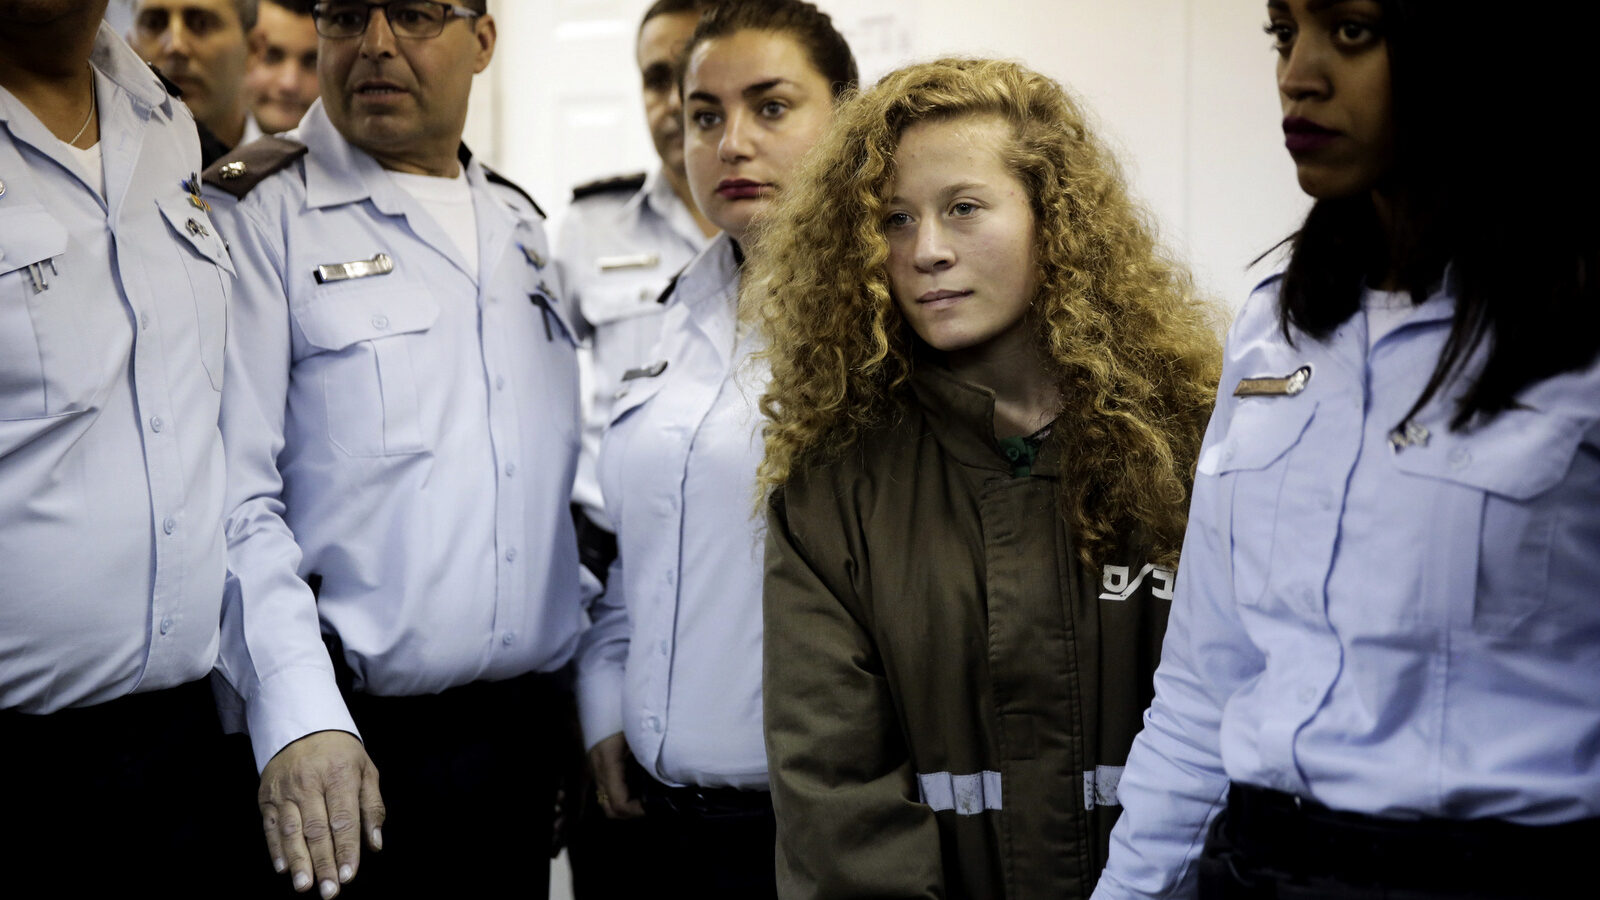 17 year-old Ahed Tamimi is brought to a courtroom inside Ofer military prison near Jerusalem, Dec. 28, 2017. Tamimi was arrested last week for slapping two Israeli soldiers who shot her 15-year old cousin in the face. She faces charges of attacking soldiers. (AP/Mahmoud Illean)